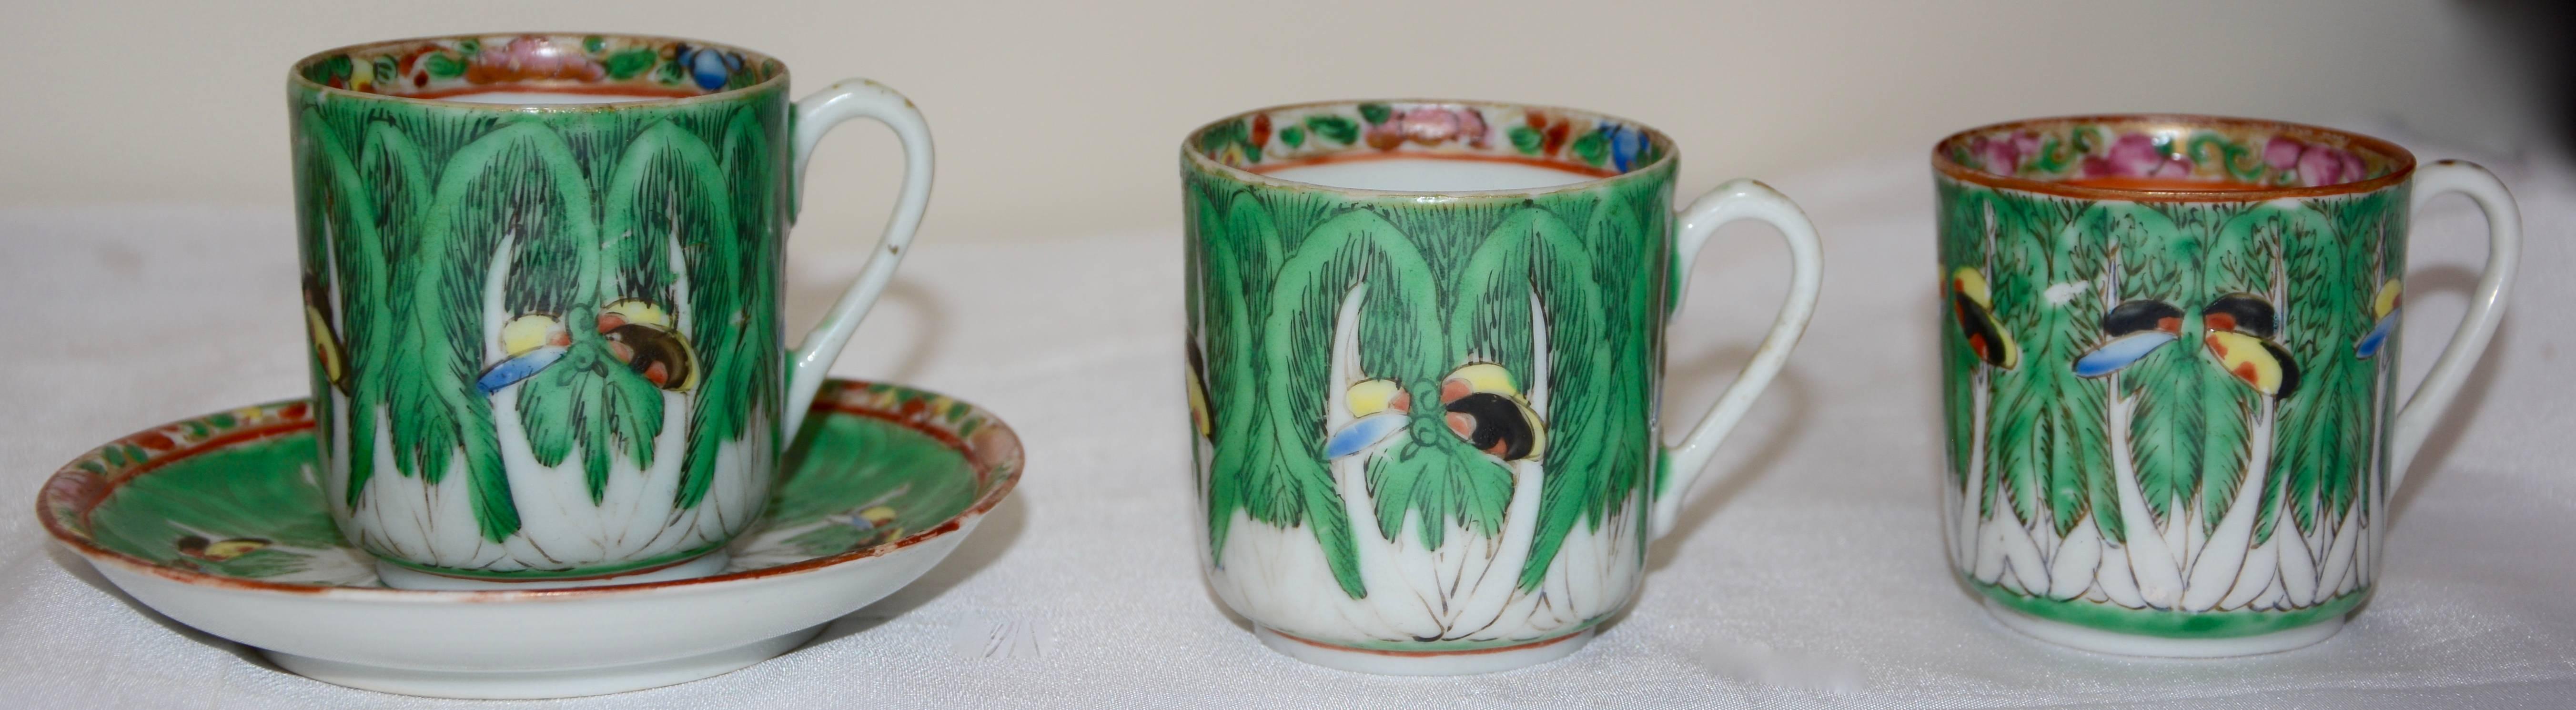 This set of porcelain consists of a dessert plate, saucer and three demitasse cups. They are hand painted with cabbage leaves and butterfly's floating about. The cups have a swirled border inside and the plates are edged the same. One cup is